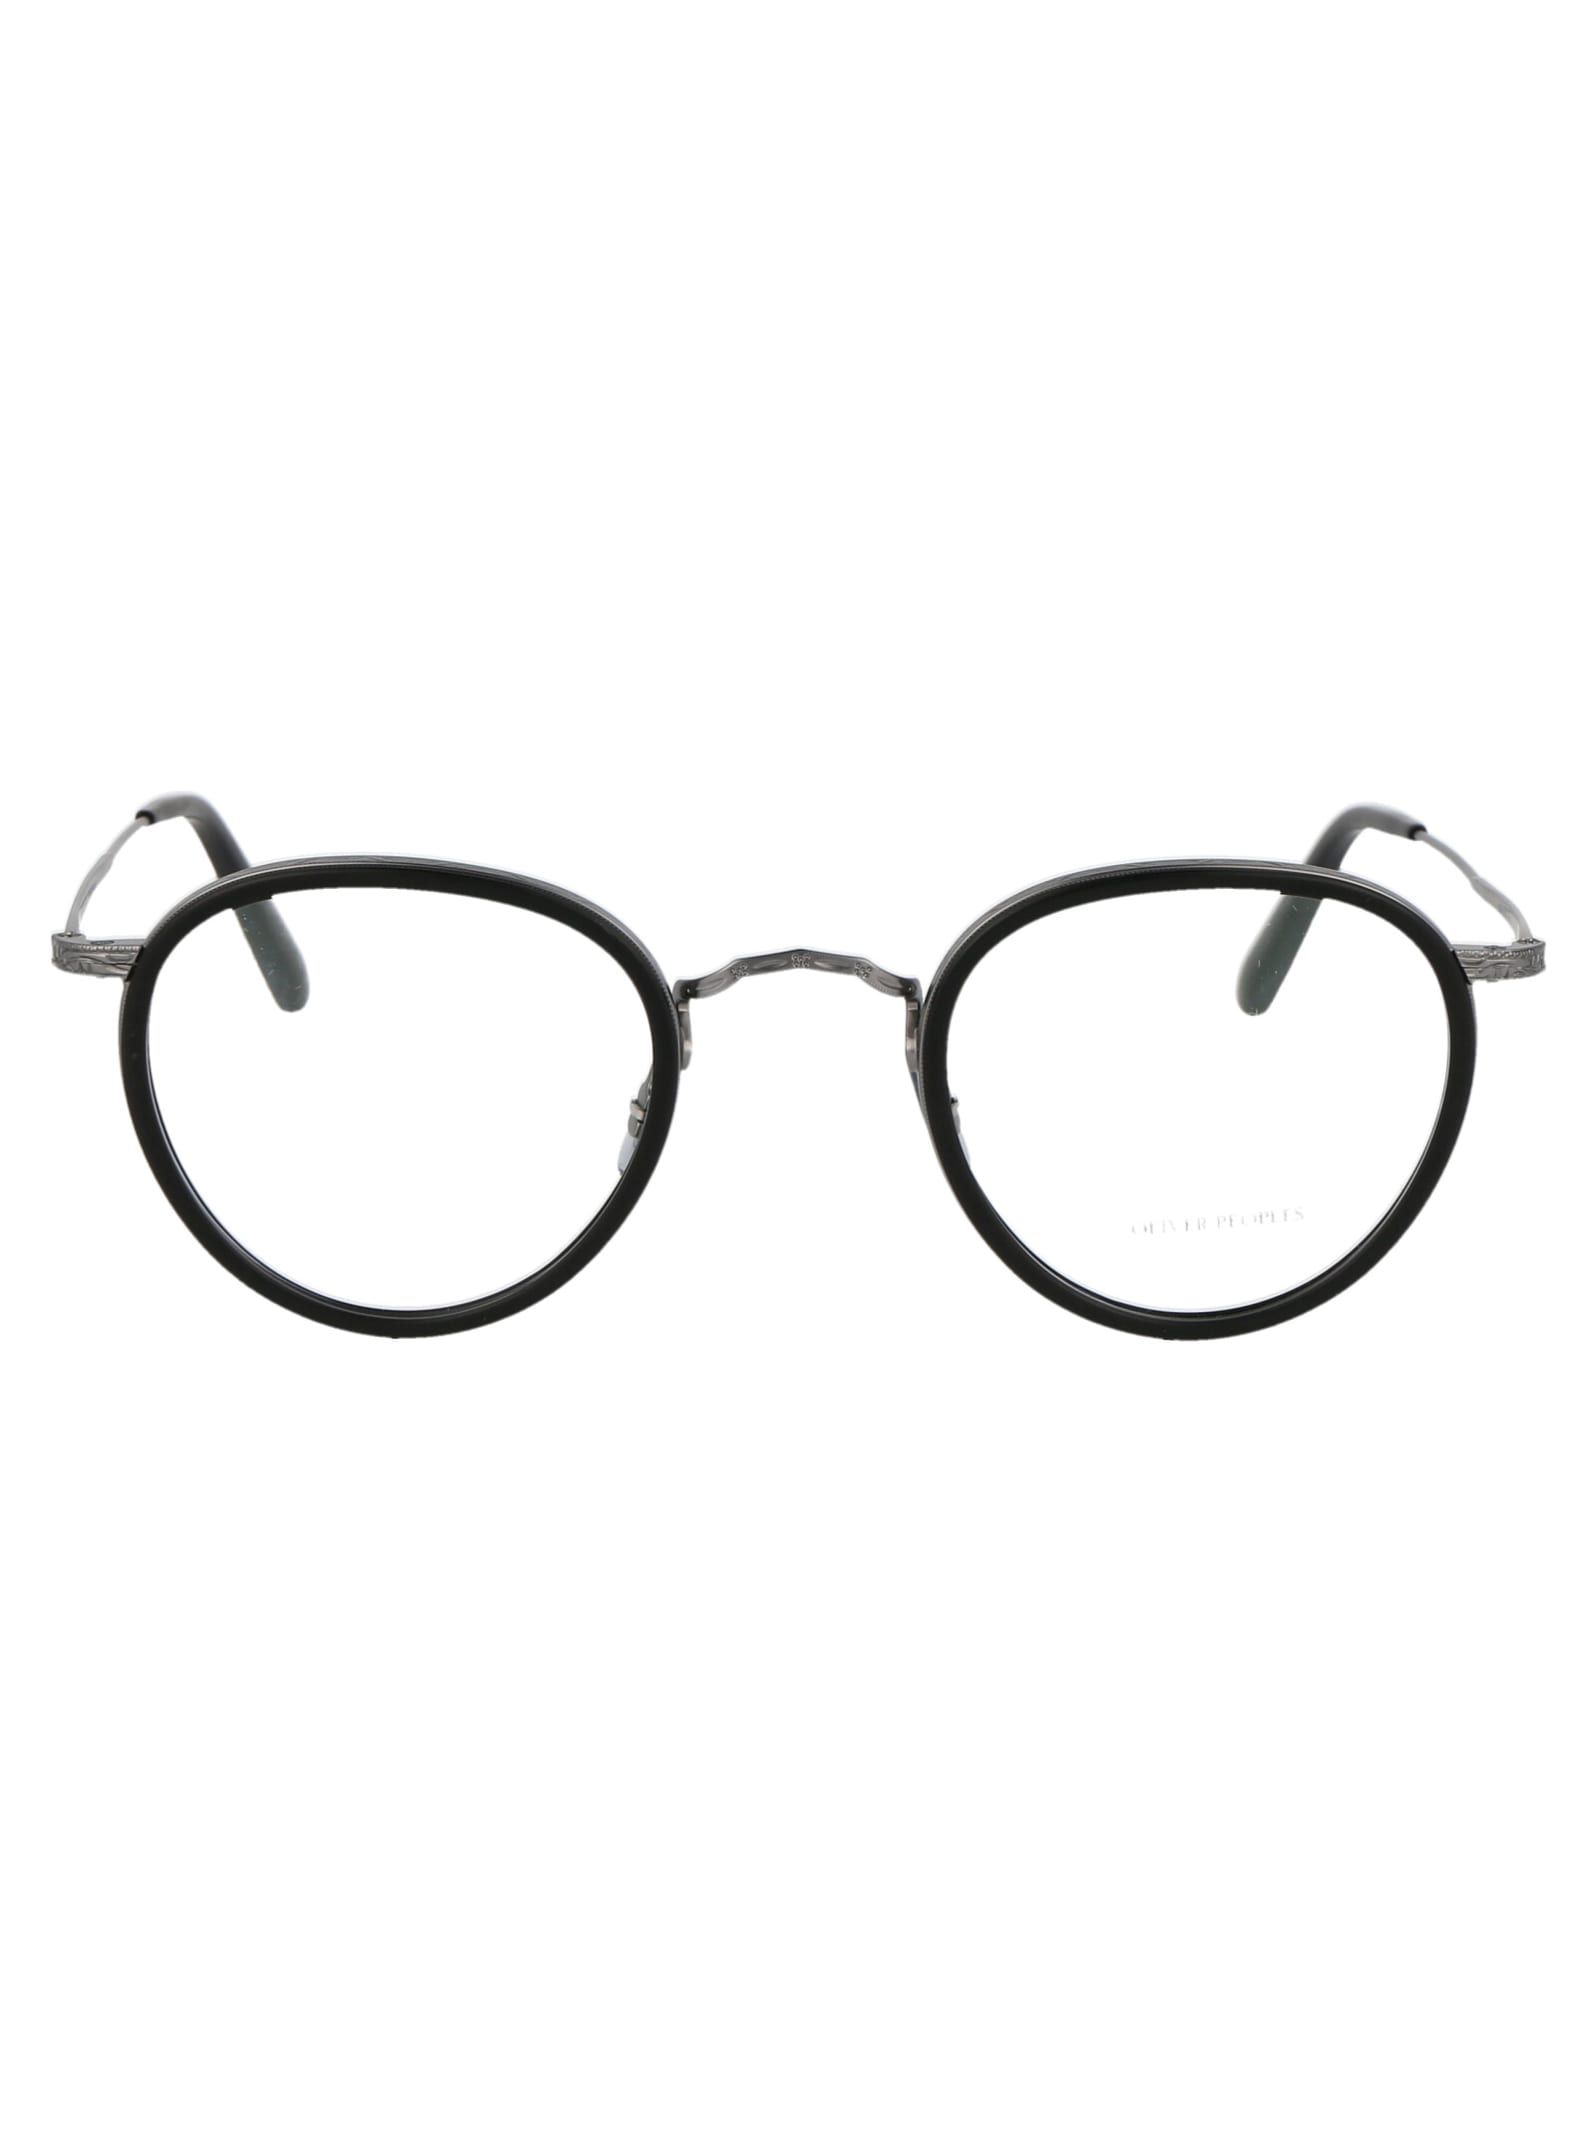 Oliver Peoples Mp-2 Sunglasses